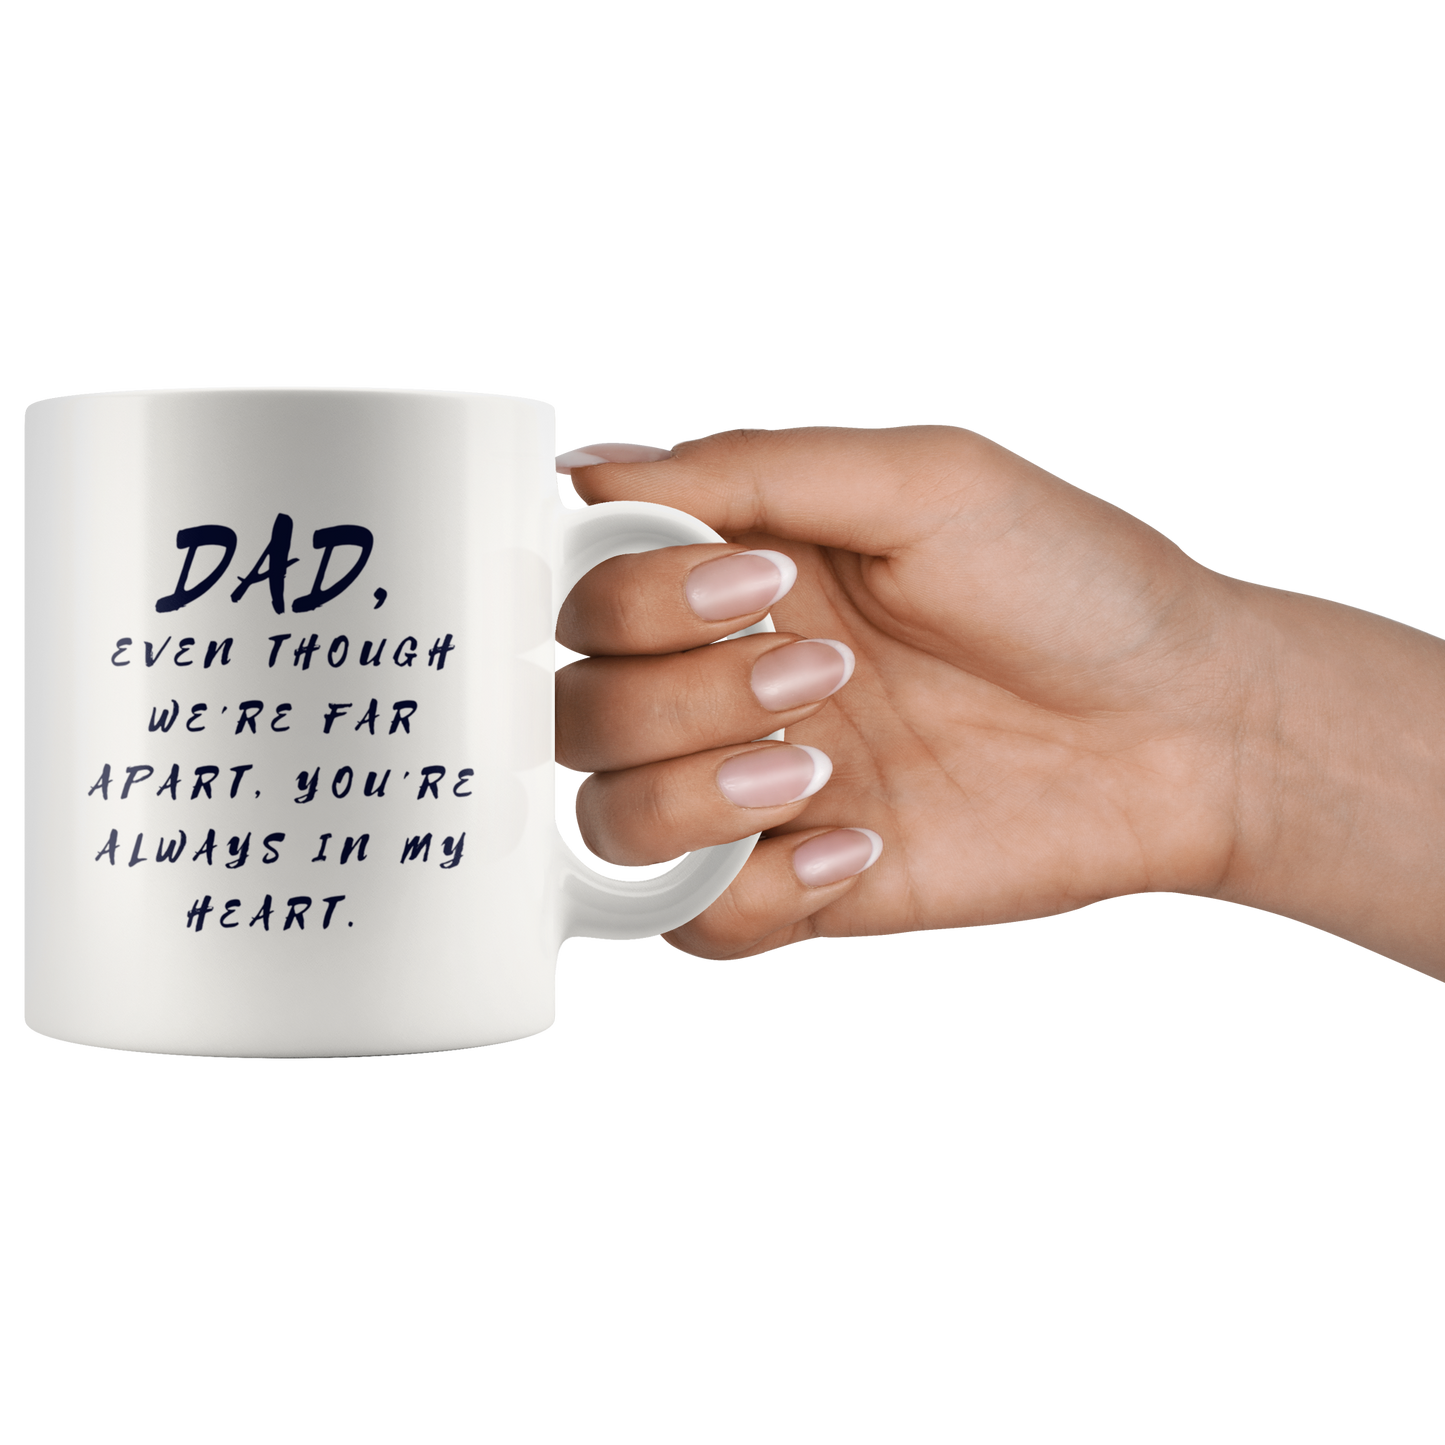 Dad Mug - 'Dad, Even Though We're Far Apart, You're Always in My Heart' (Blue) - Makes a great gift for Birthdays, Christmas, Father's Day or anytime!